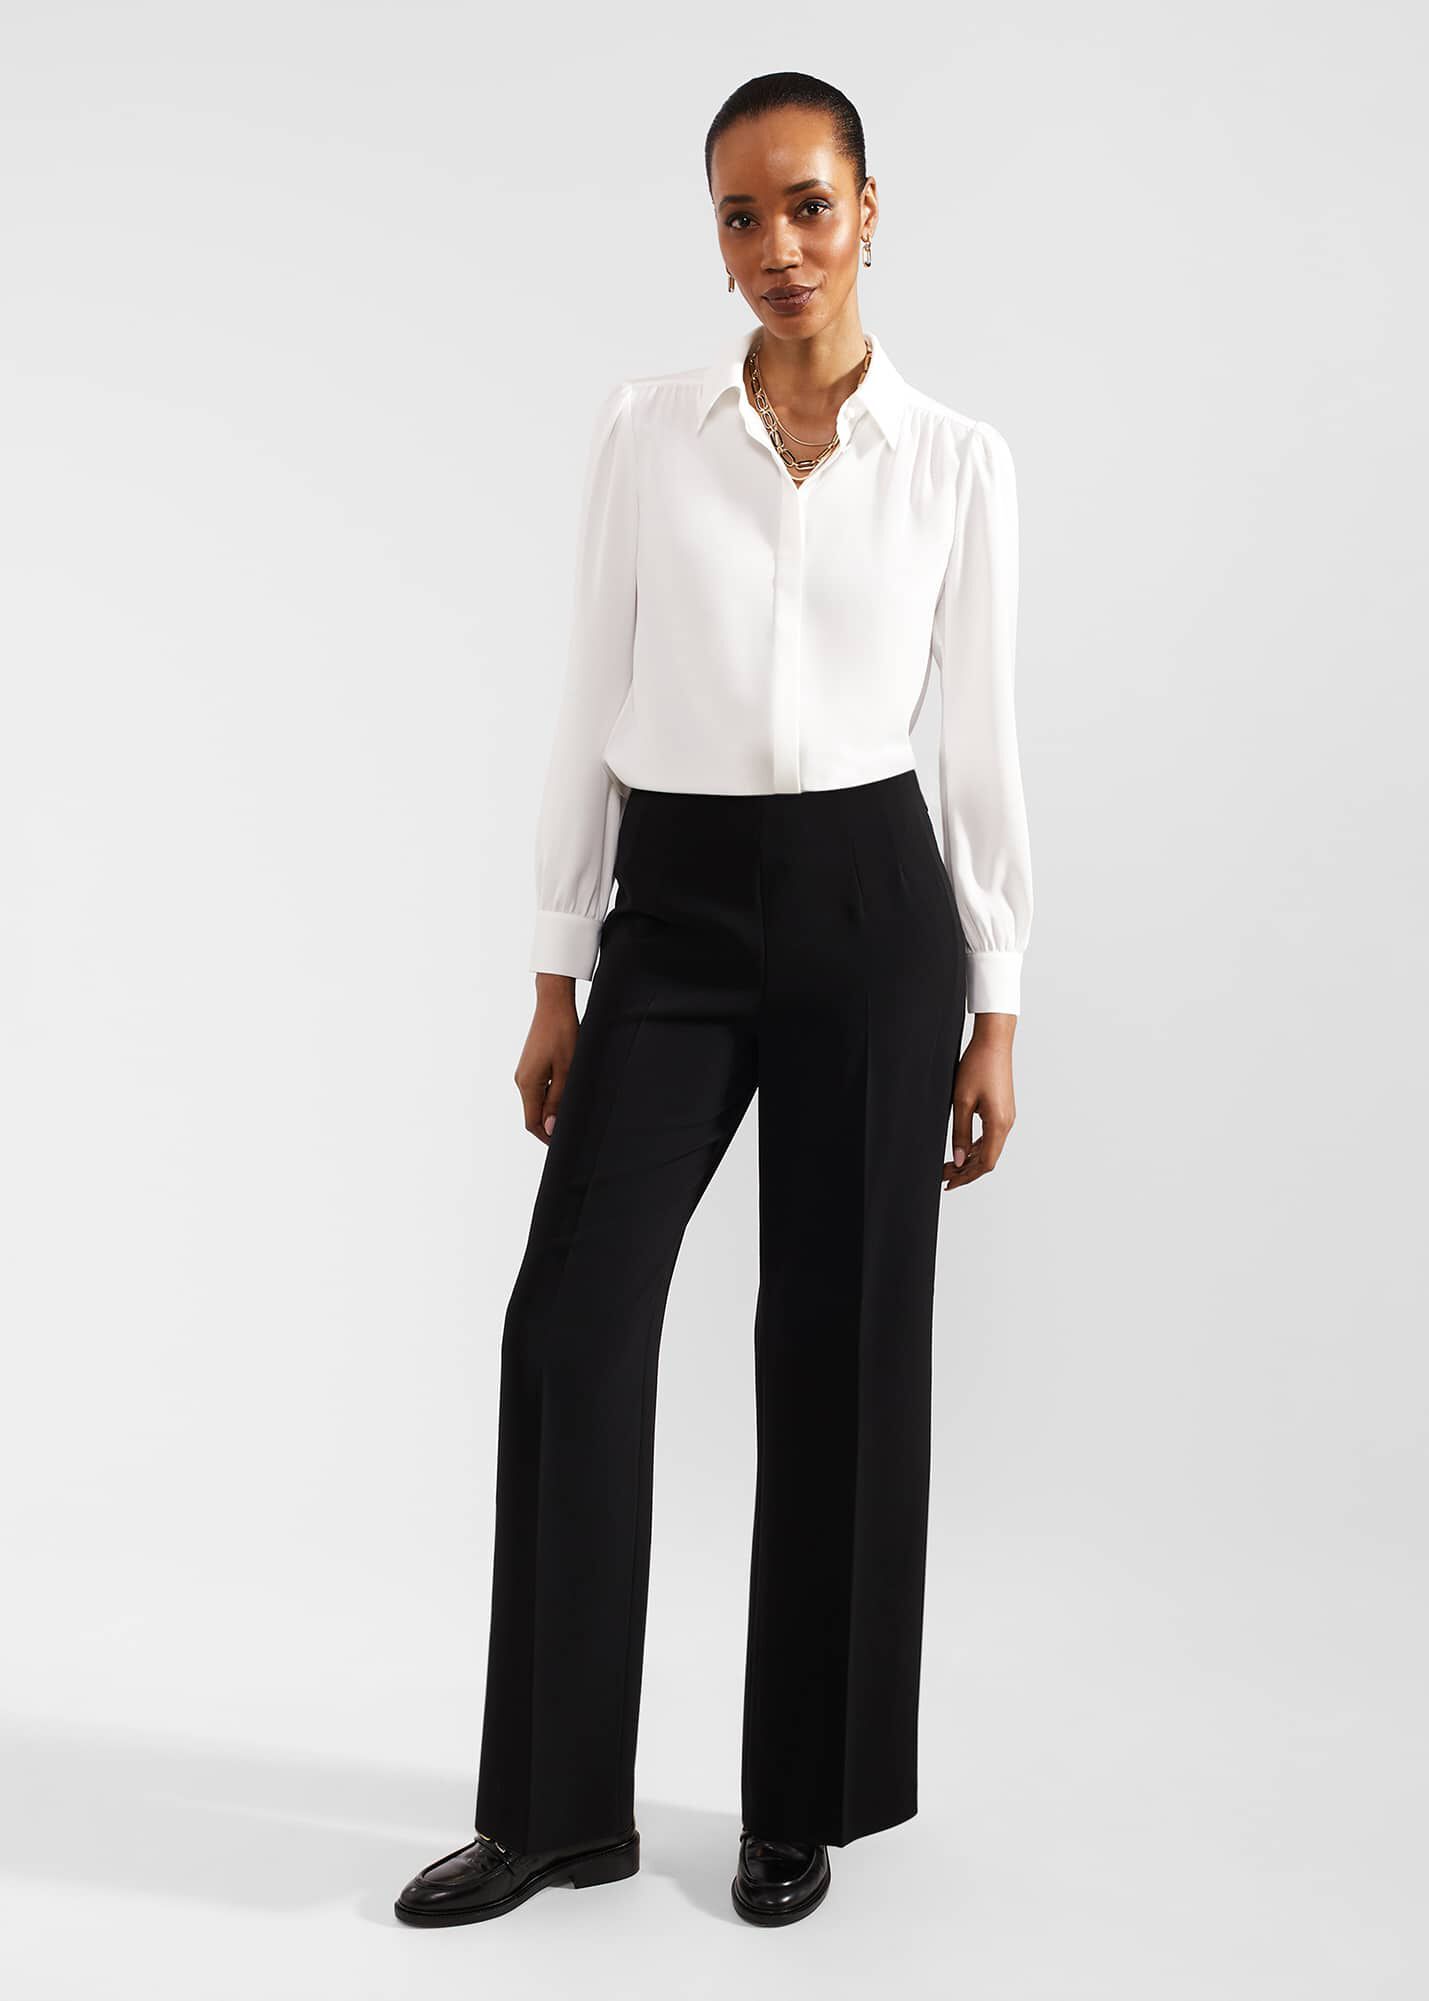 Annabelle Women White Trousers - Selling Fast at Pantaloons.com